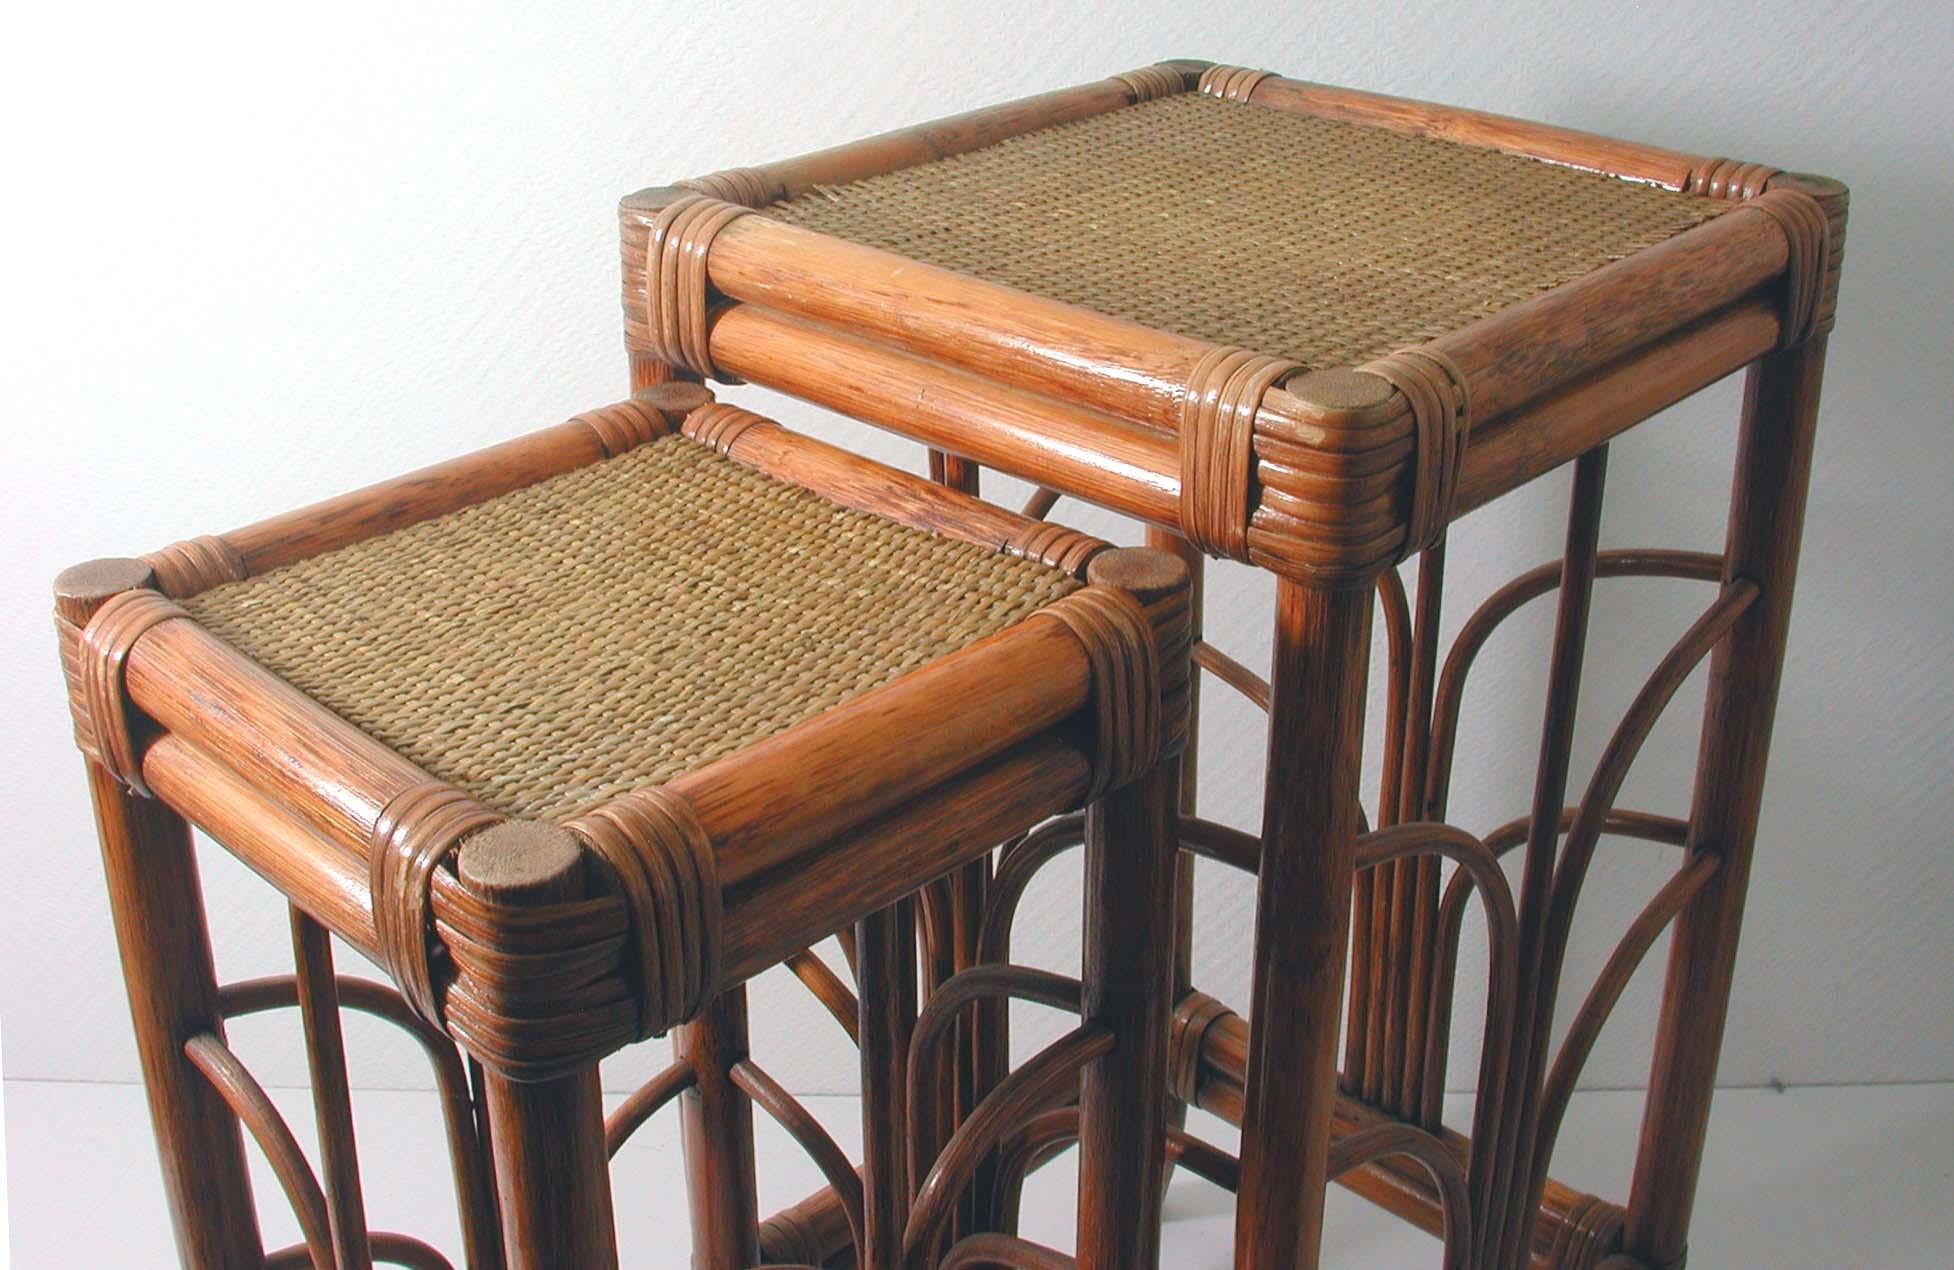 These elegant bamboo stacking nesting tables were designed and manufactured in France in the 1950s. They can be used as end tables or as plant stands.

Measures: Small table: H 22